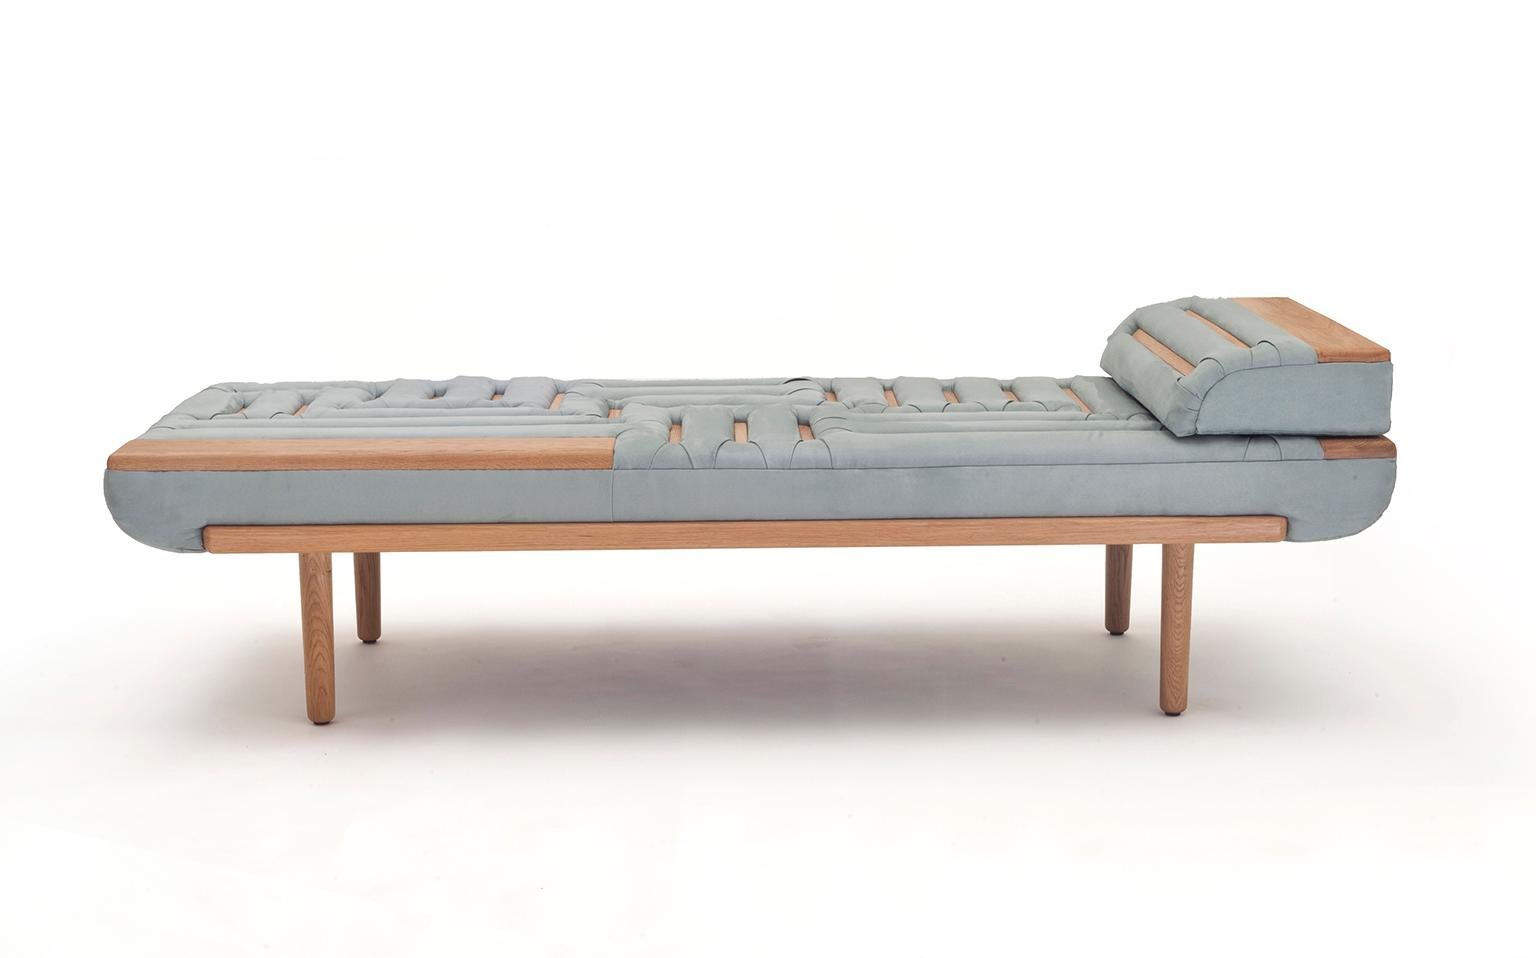 Lignes de Capiton presents a fresh and innovative take on the traditional upholstery technique of Capitonnage – button sofa. Thin, elongated wood beams replace the common buttons that pin-down the cushioned fabric, creating a surprisingly